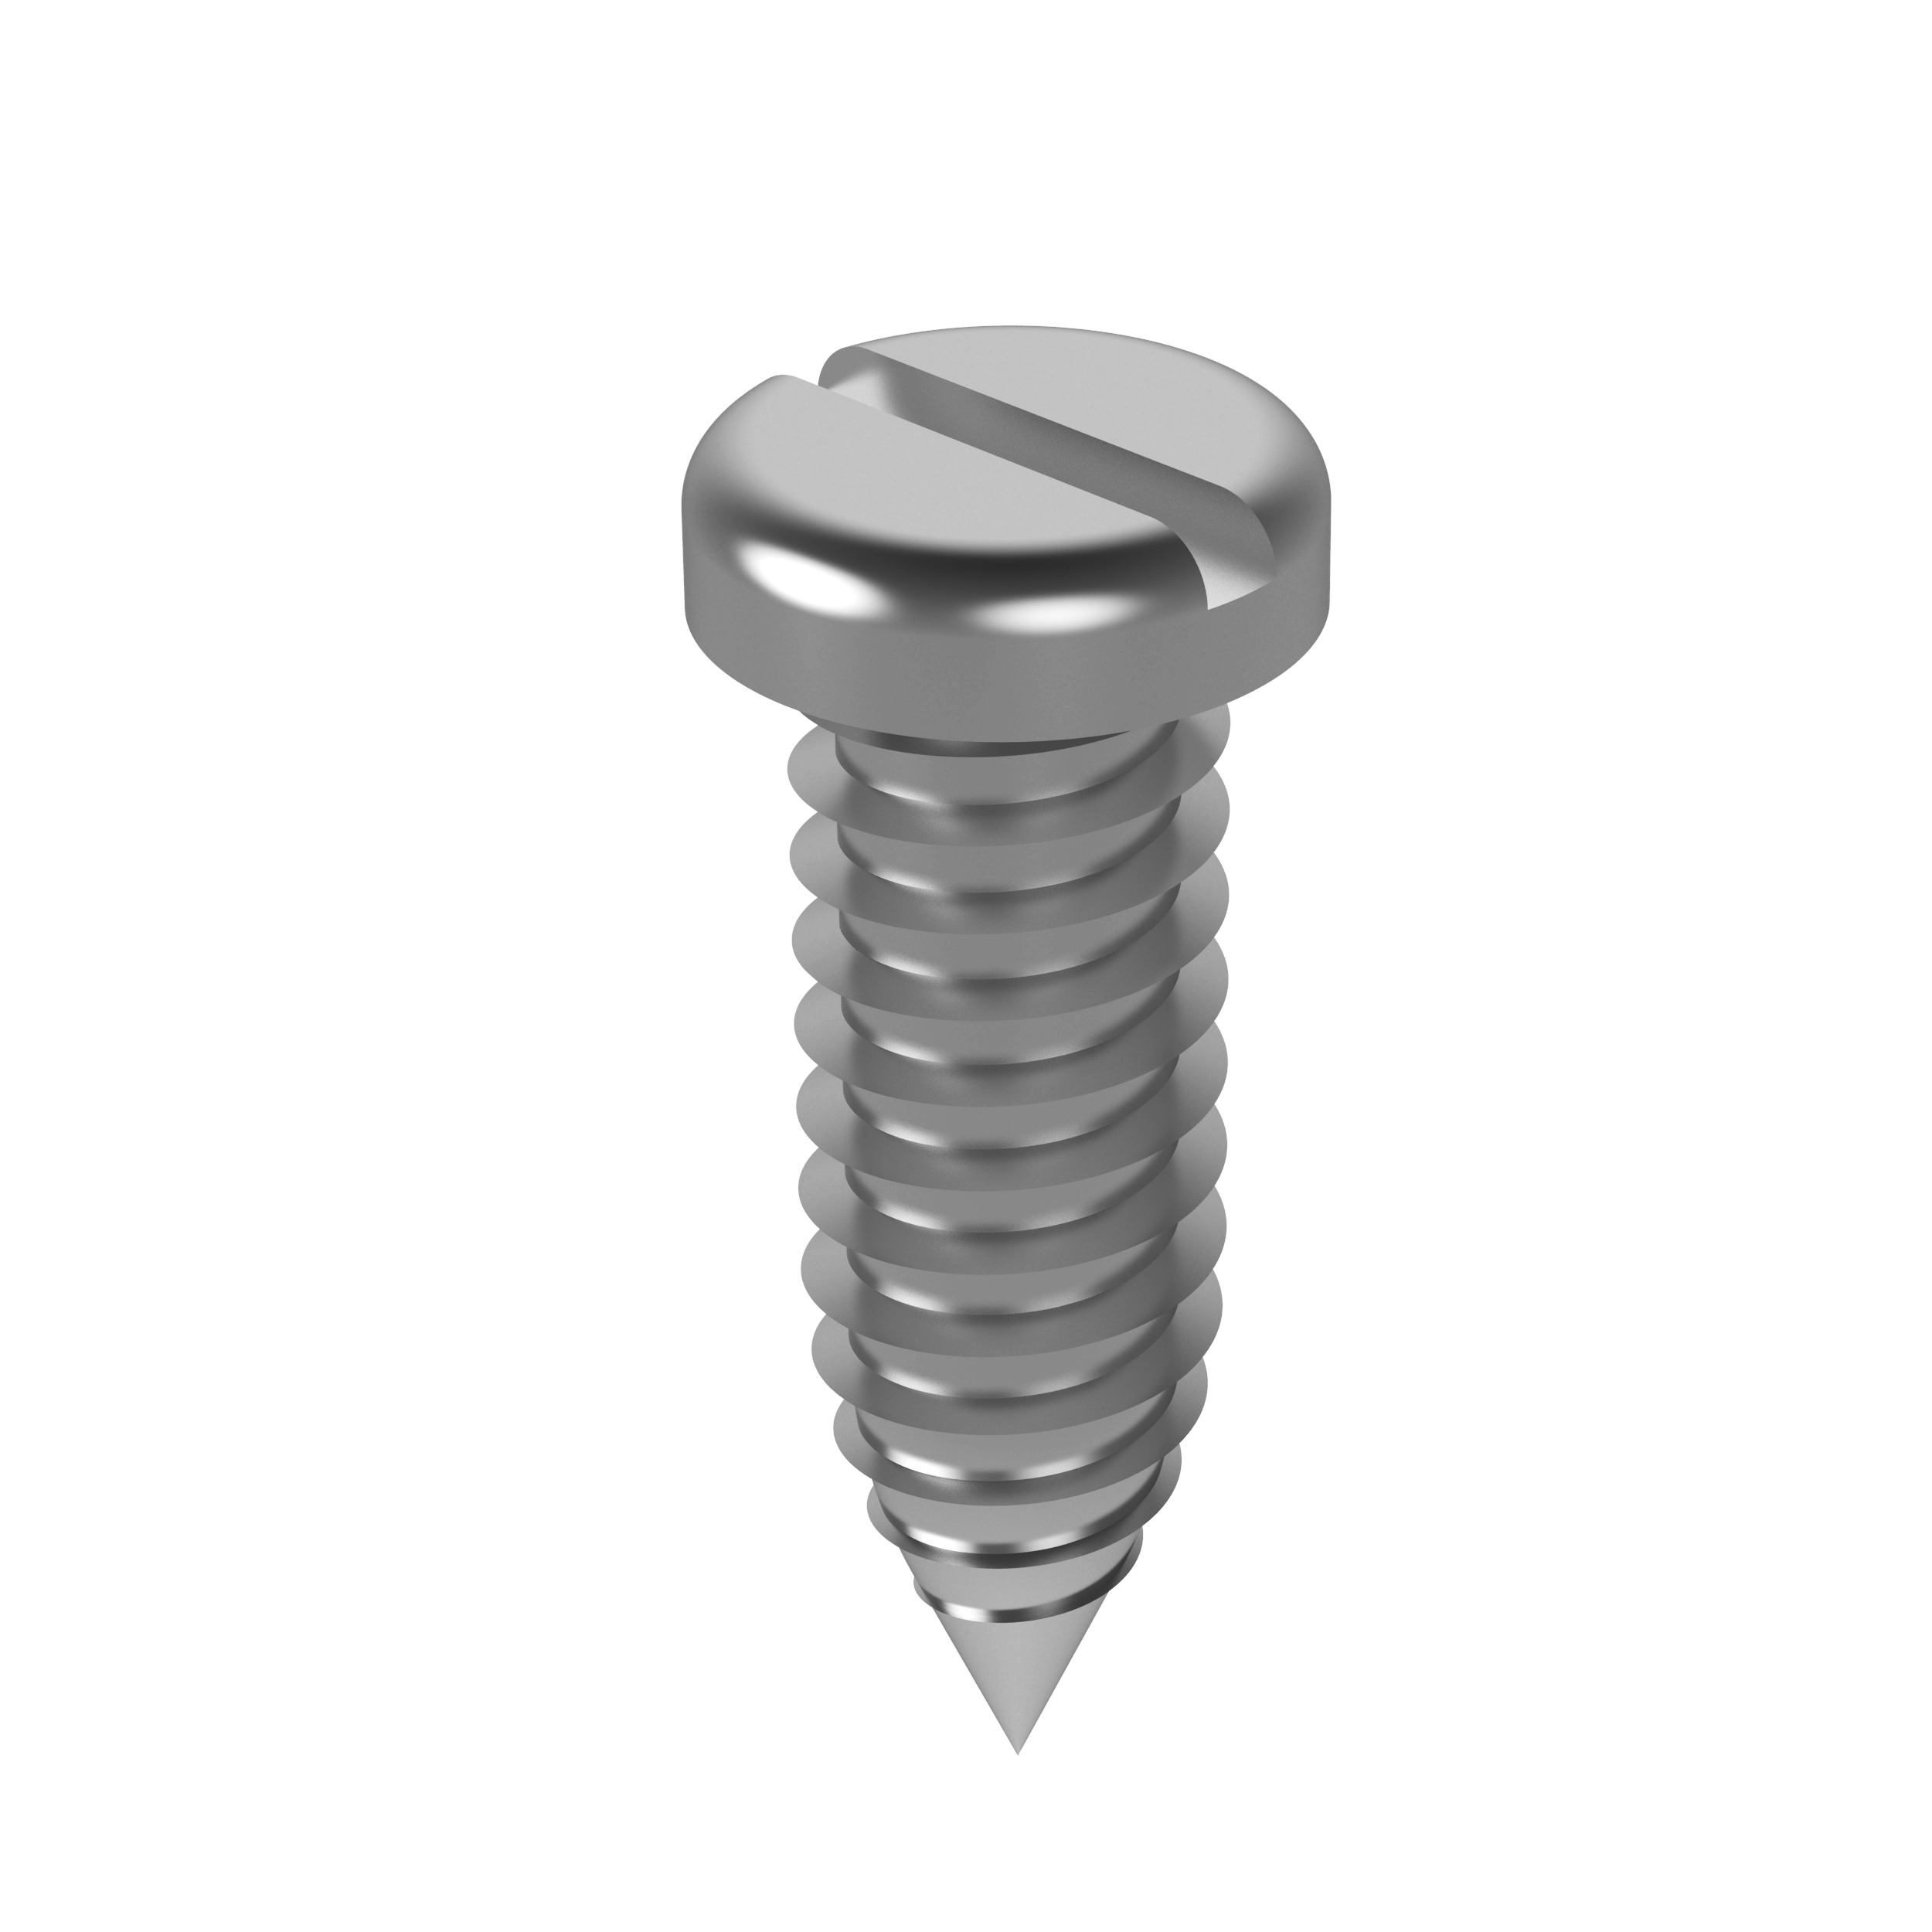 Slotted self-tapping screws